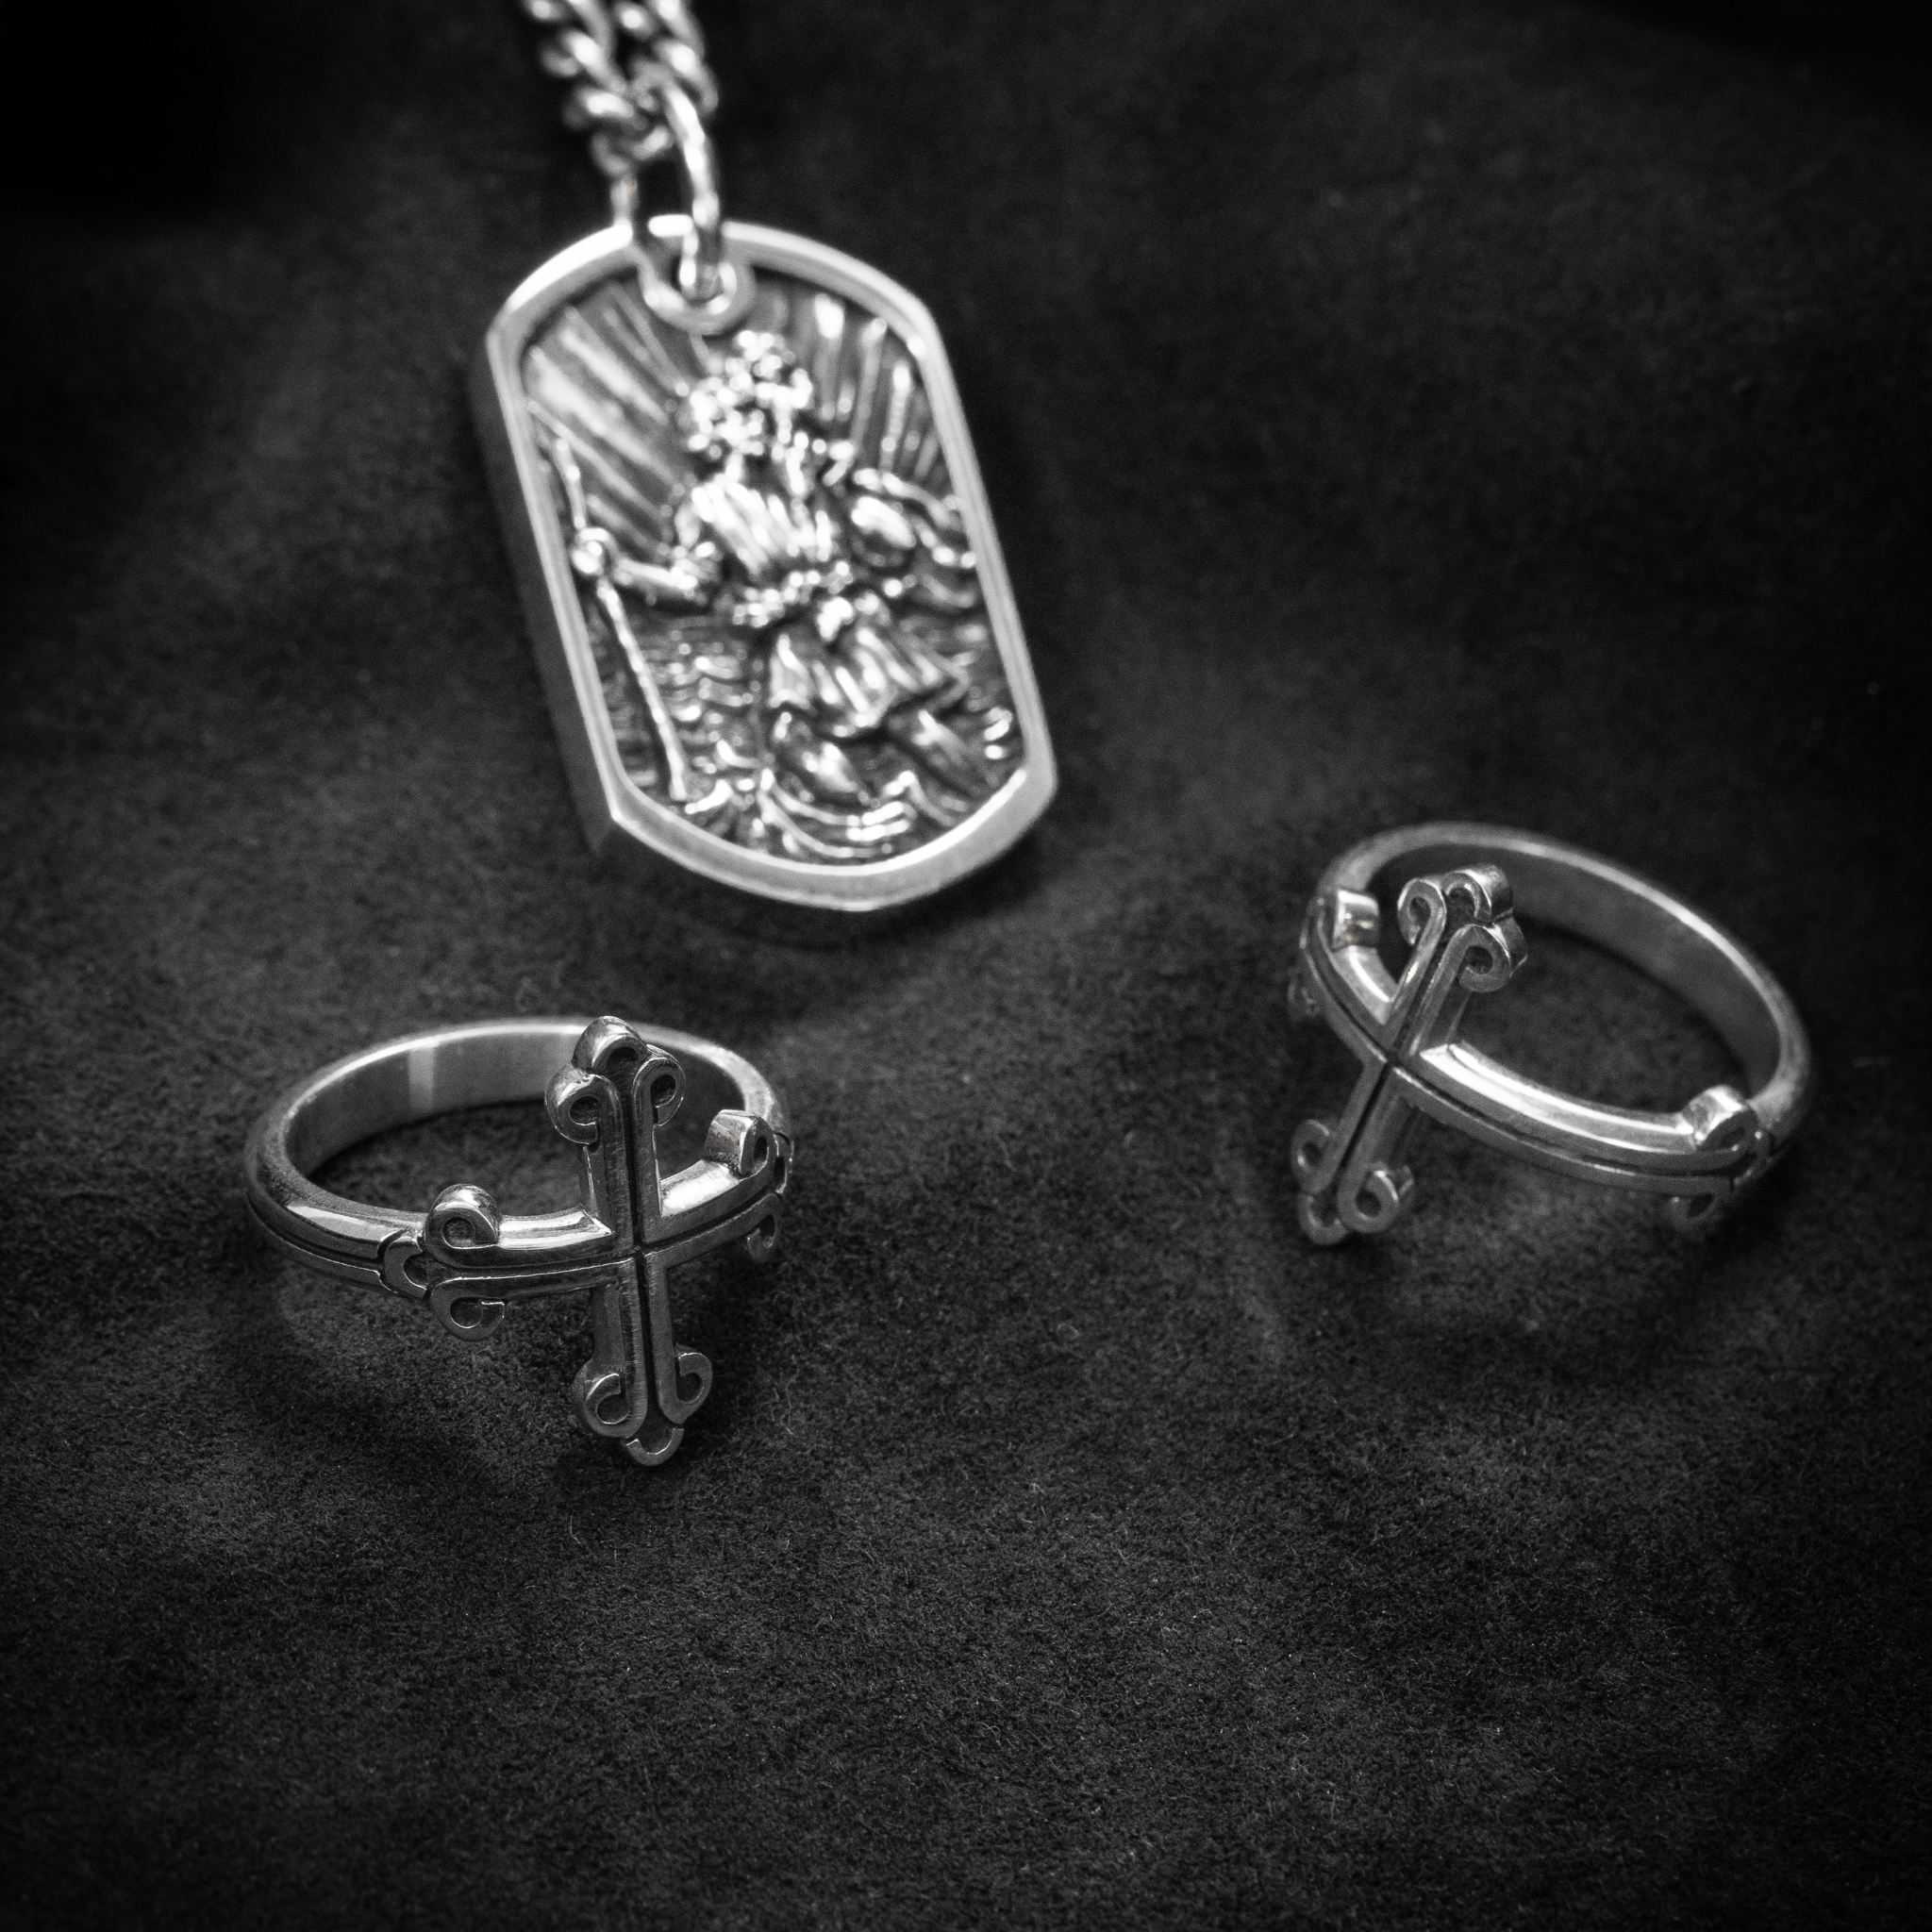 Lifestyle shot of 2 cross rings and dog tag